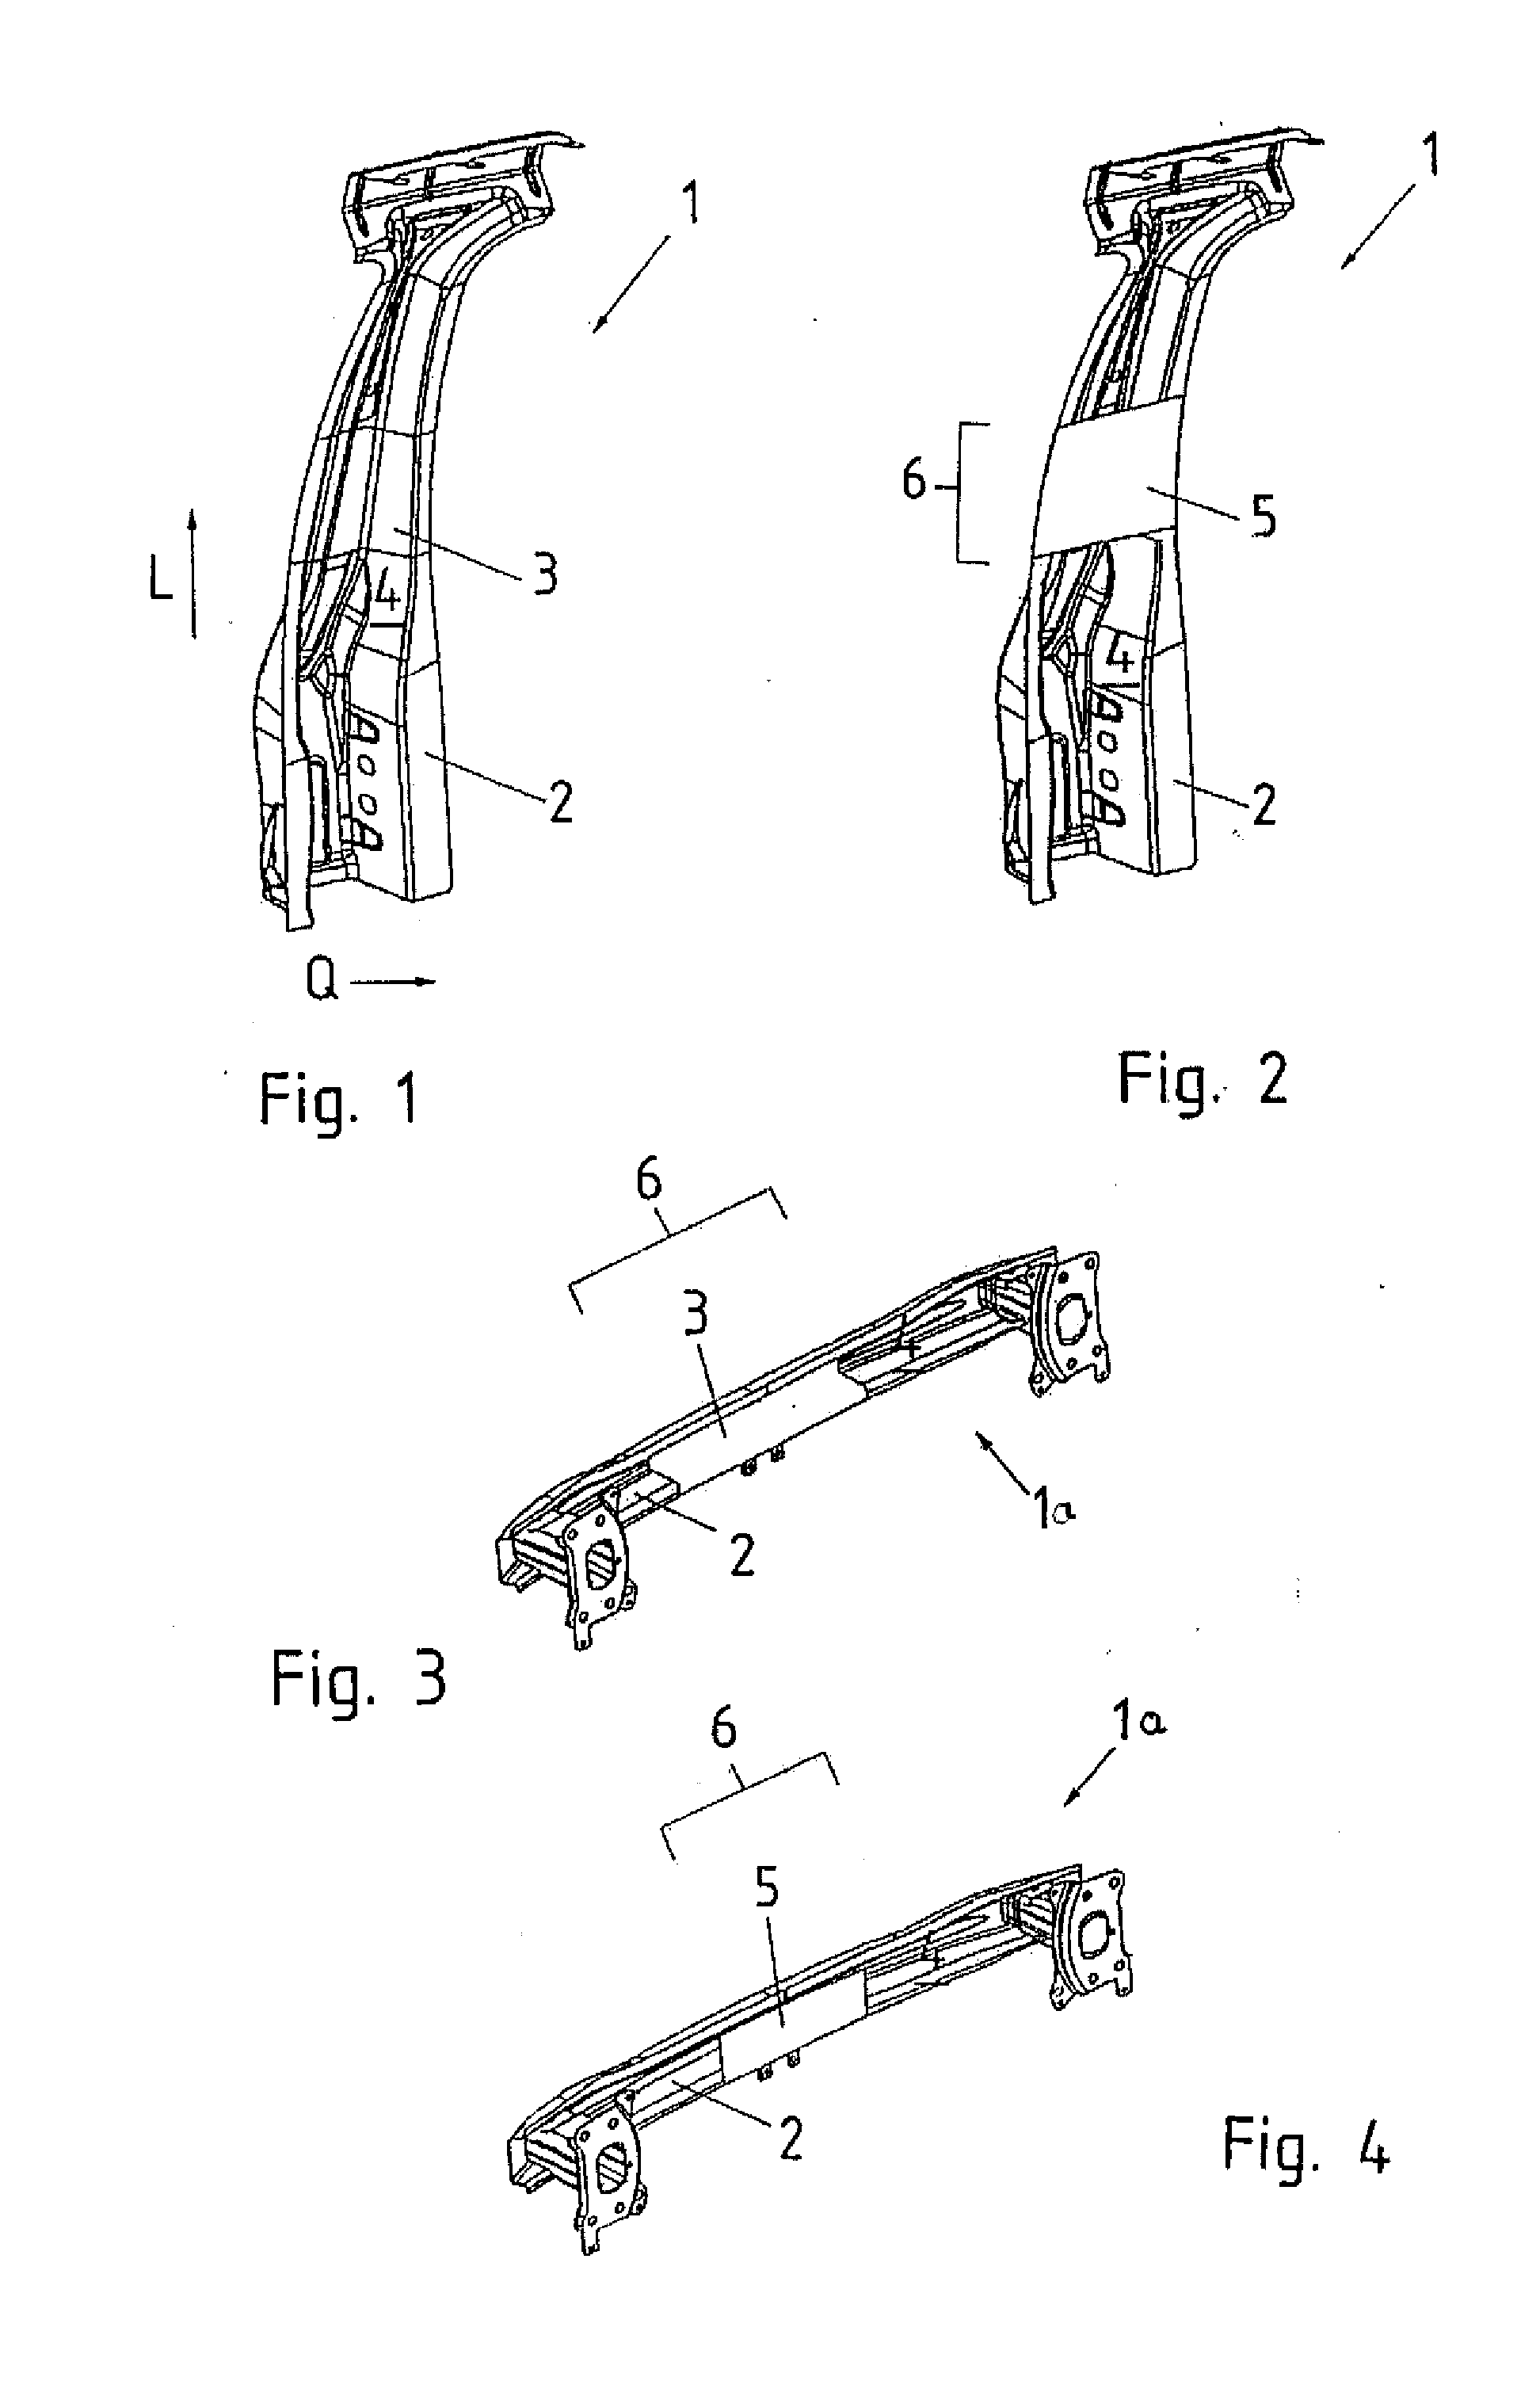 Motor vehicle structure, and method of making a motor vehicle structure